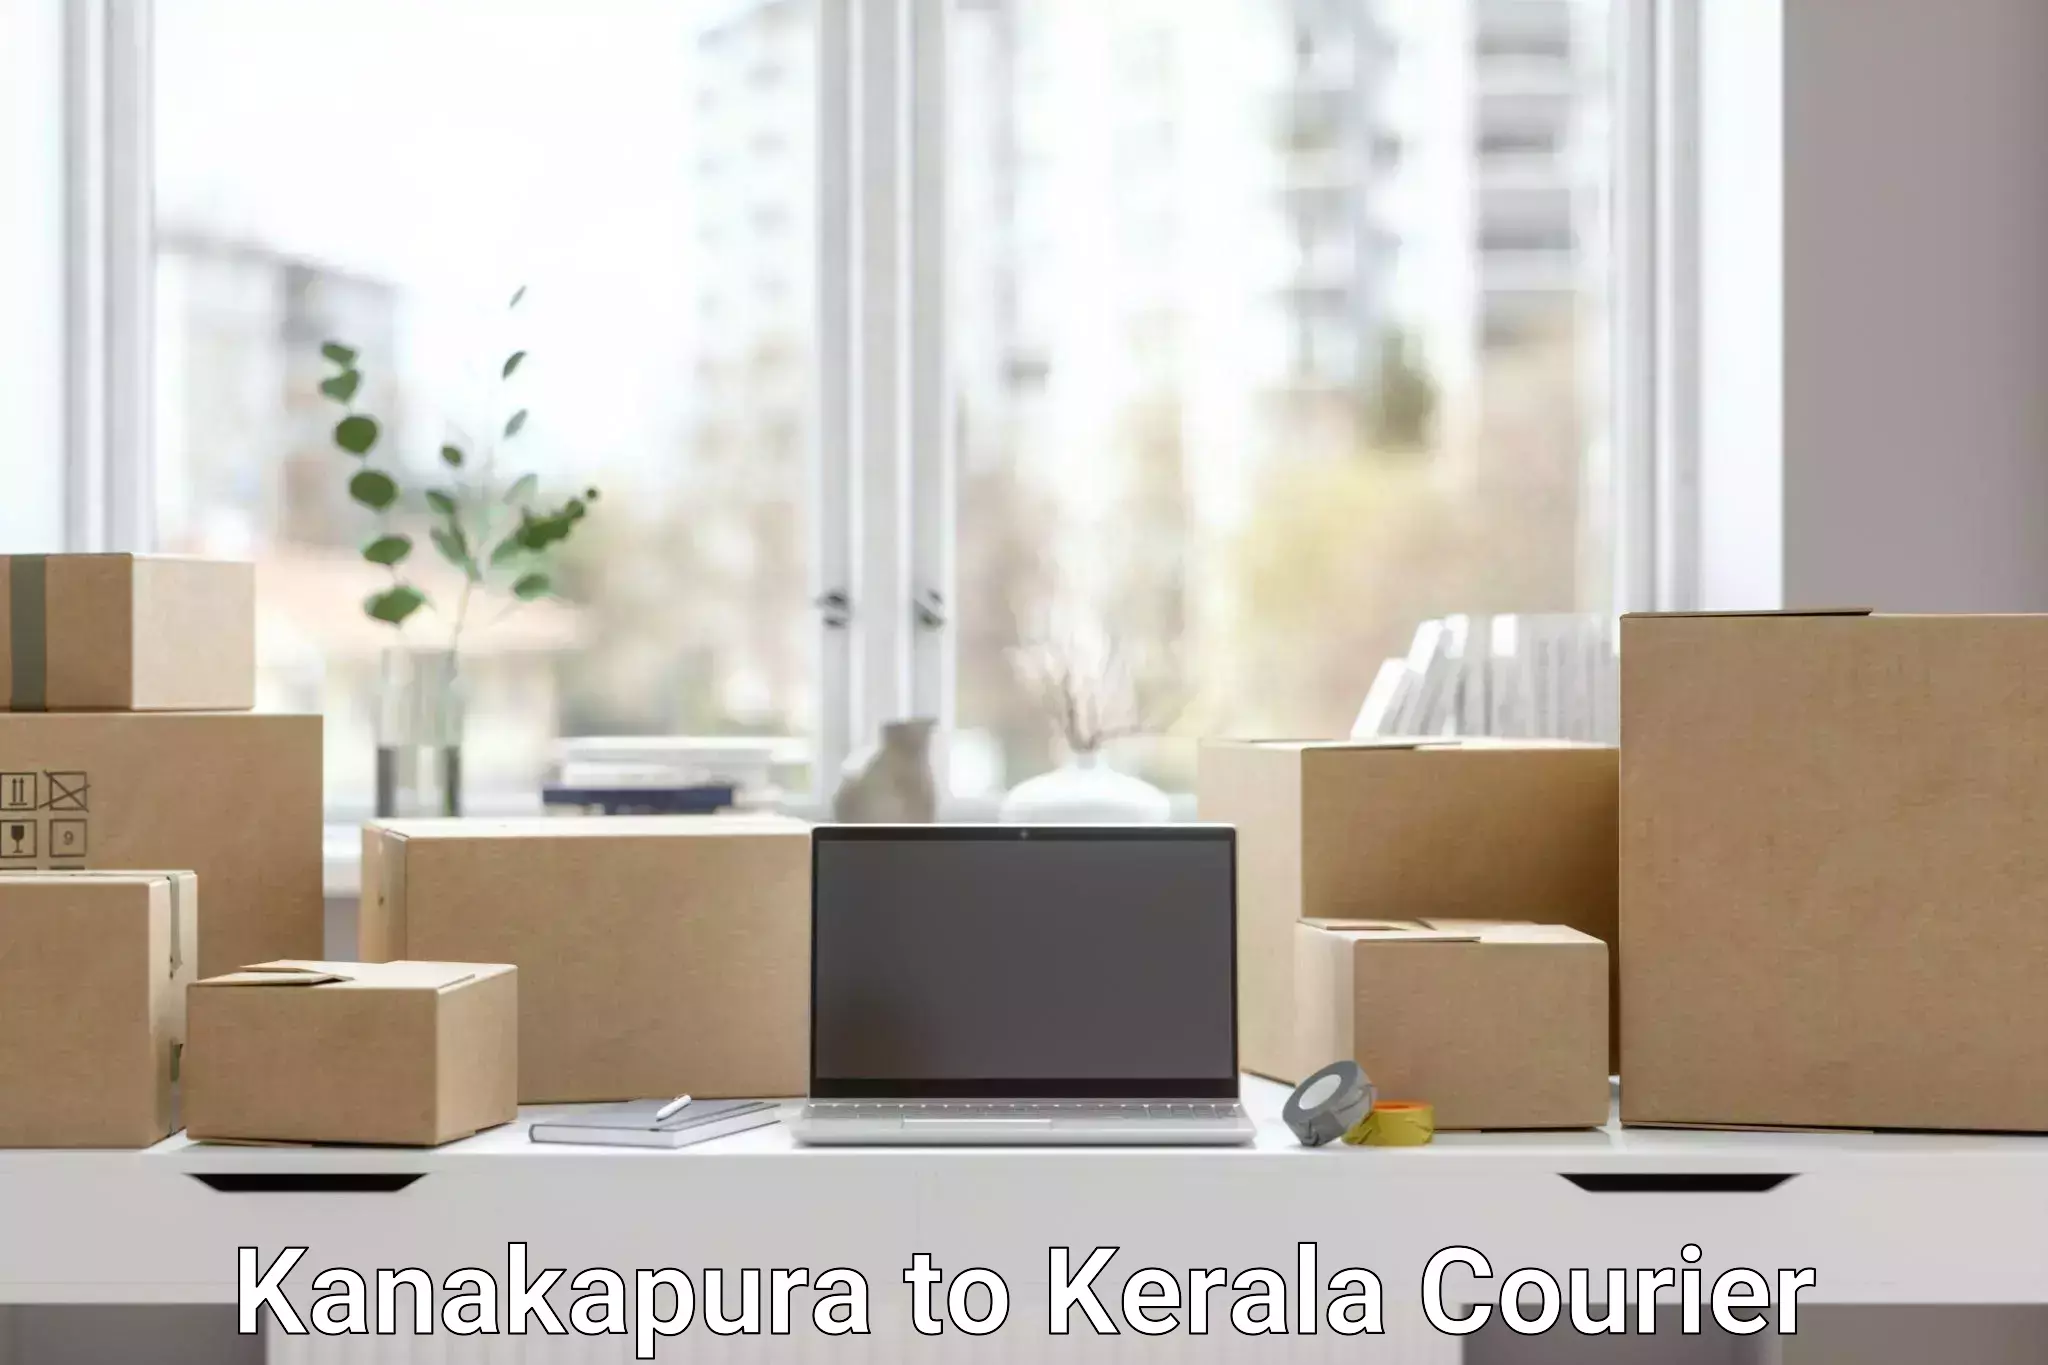 Round-the-clock parcel delivery Kanakapura to Cochin University of Science and Technology